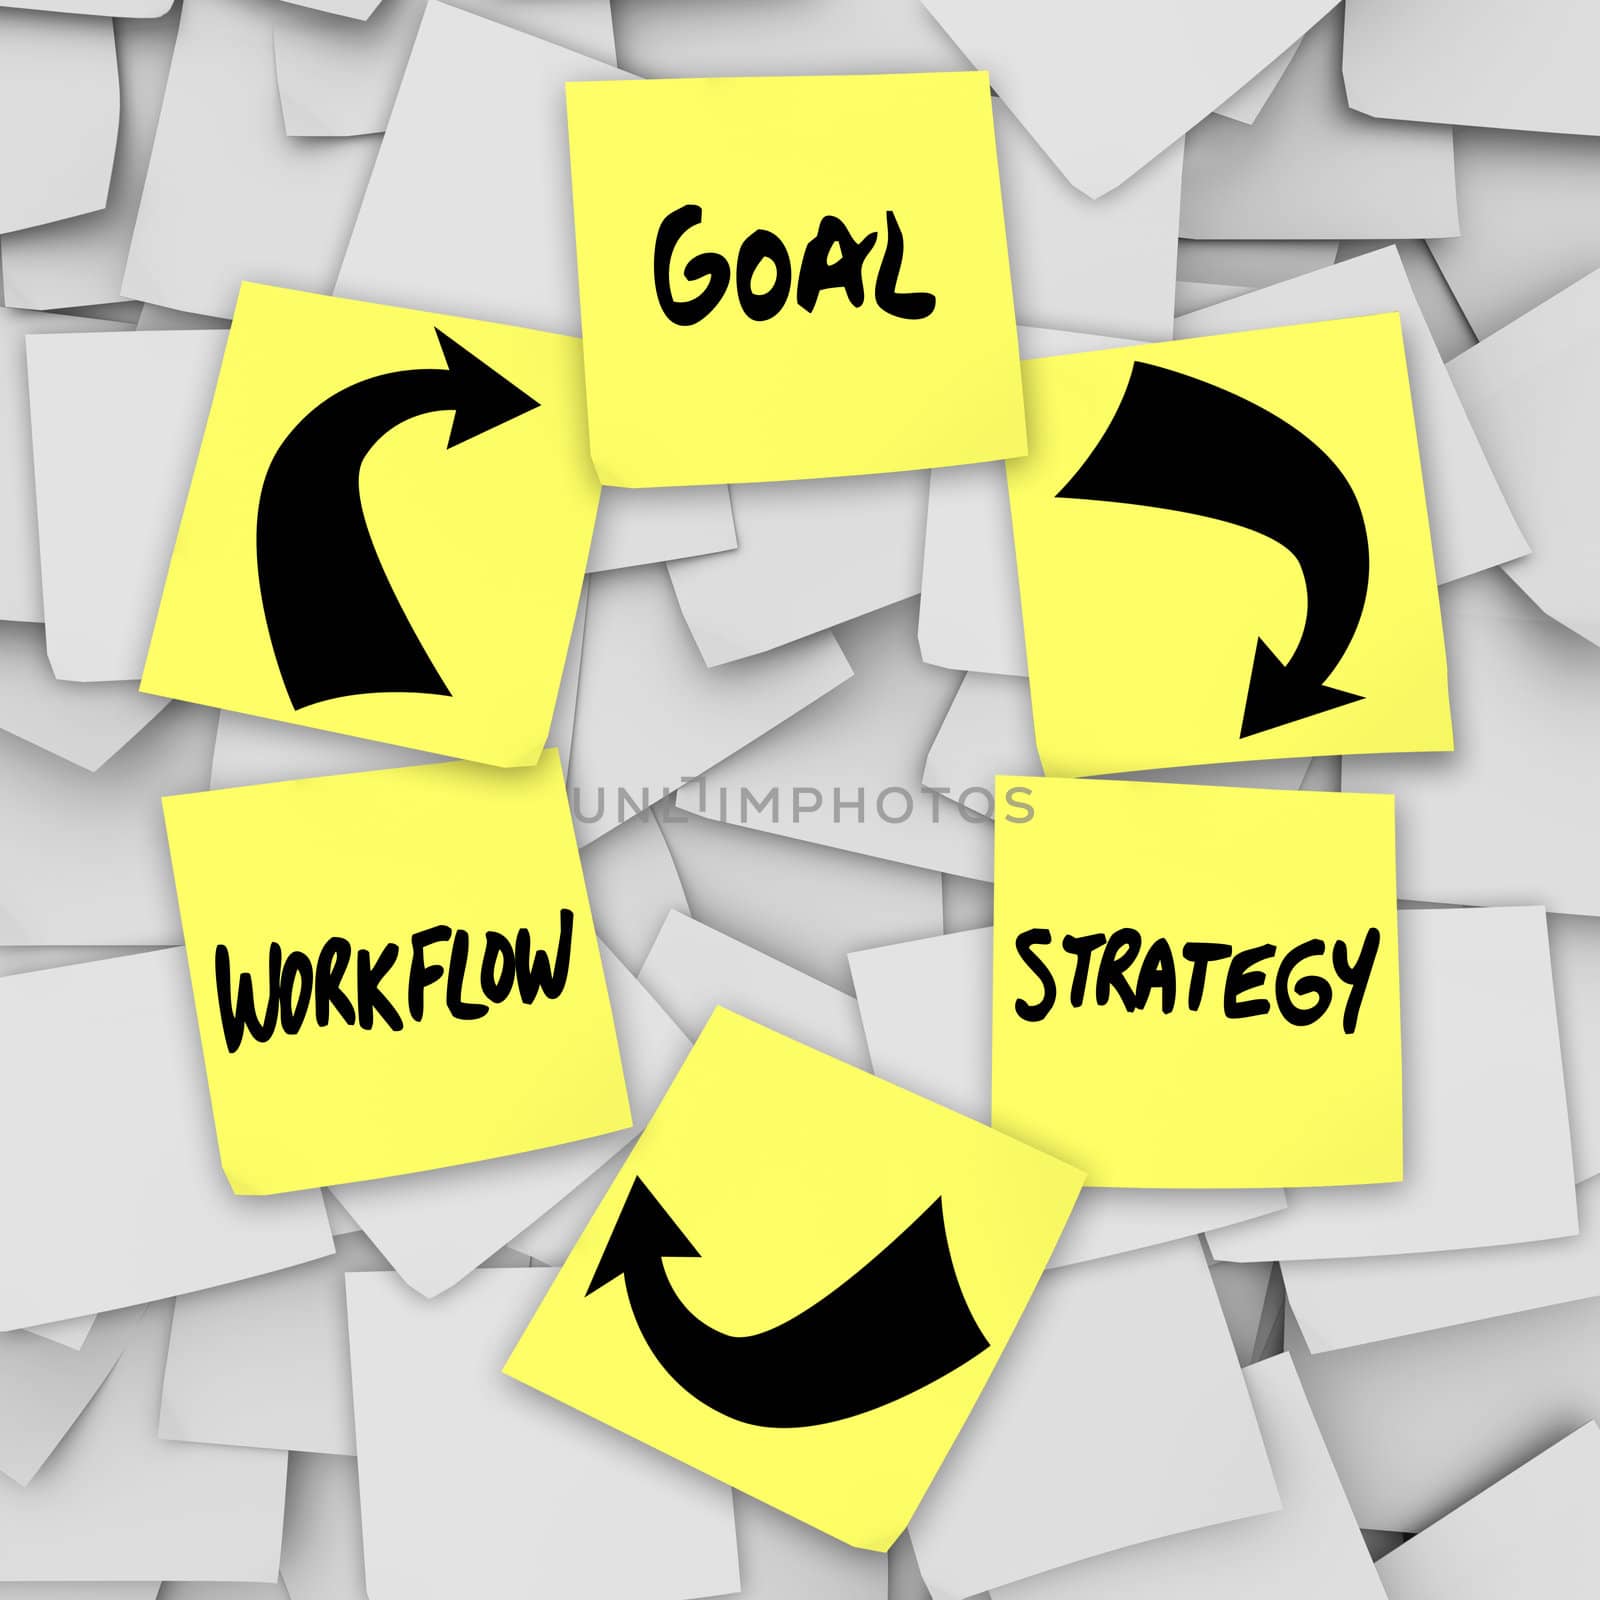 Goal Strategy Workflow - Sticky Notes Plan for Success by iQoncept